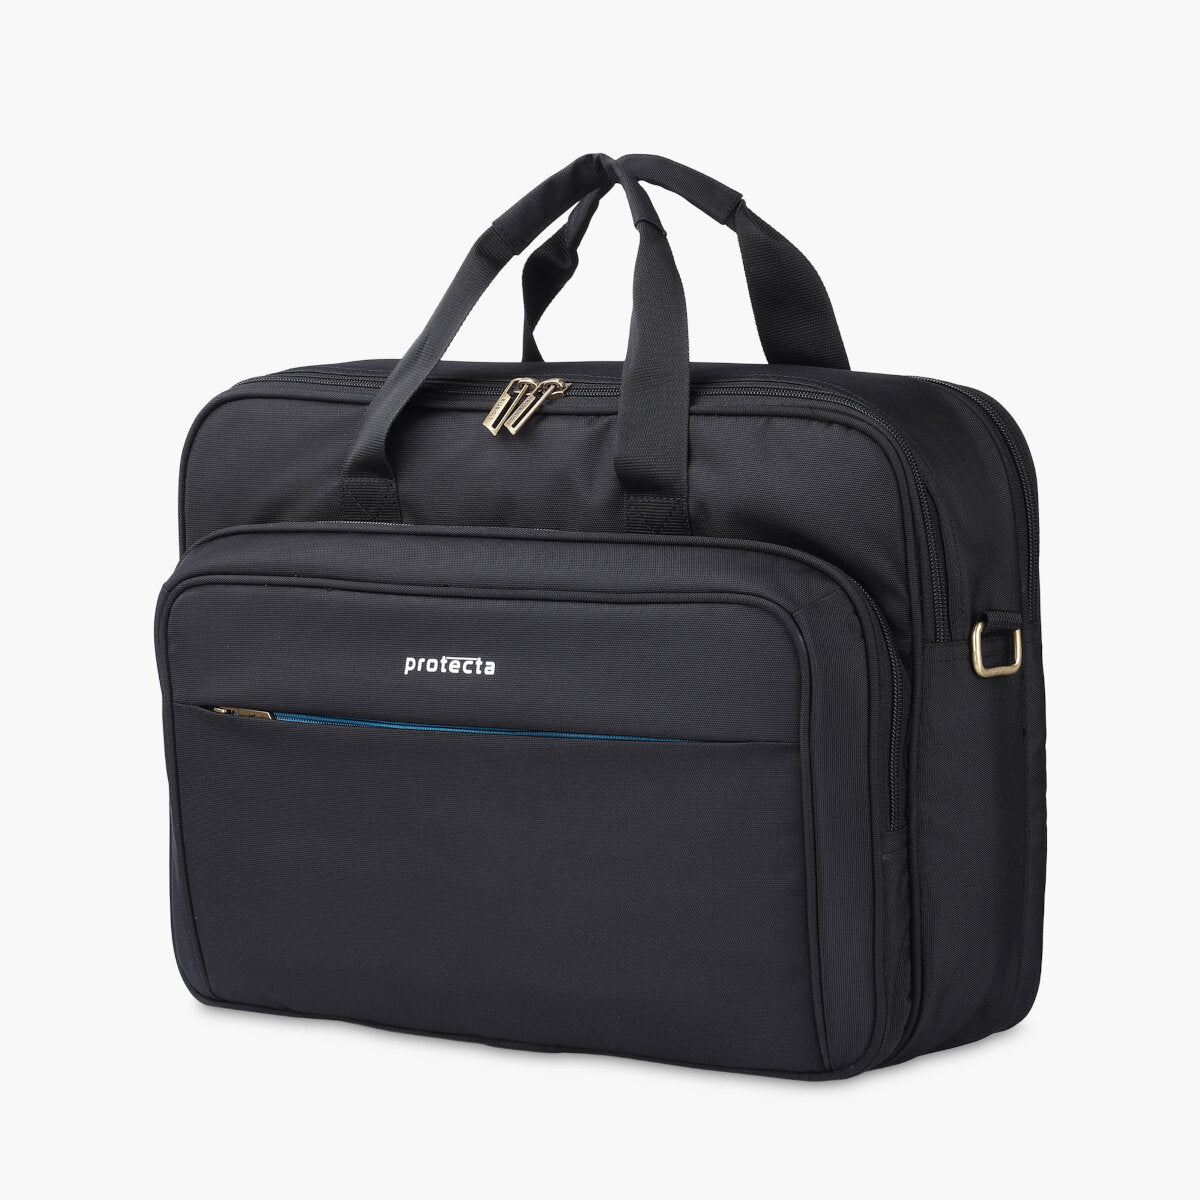 Black-Blue, Protecta Staunch Ally Travel & Offfice Laptop Bag-2